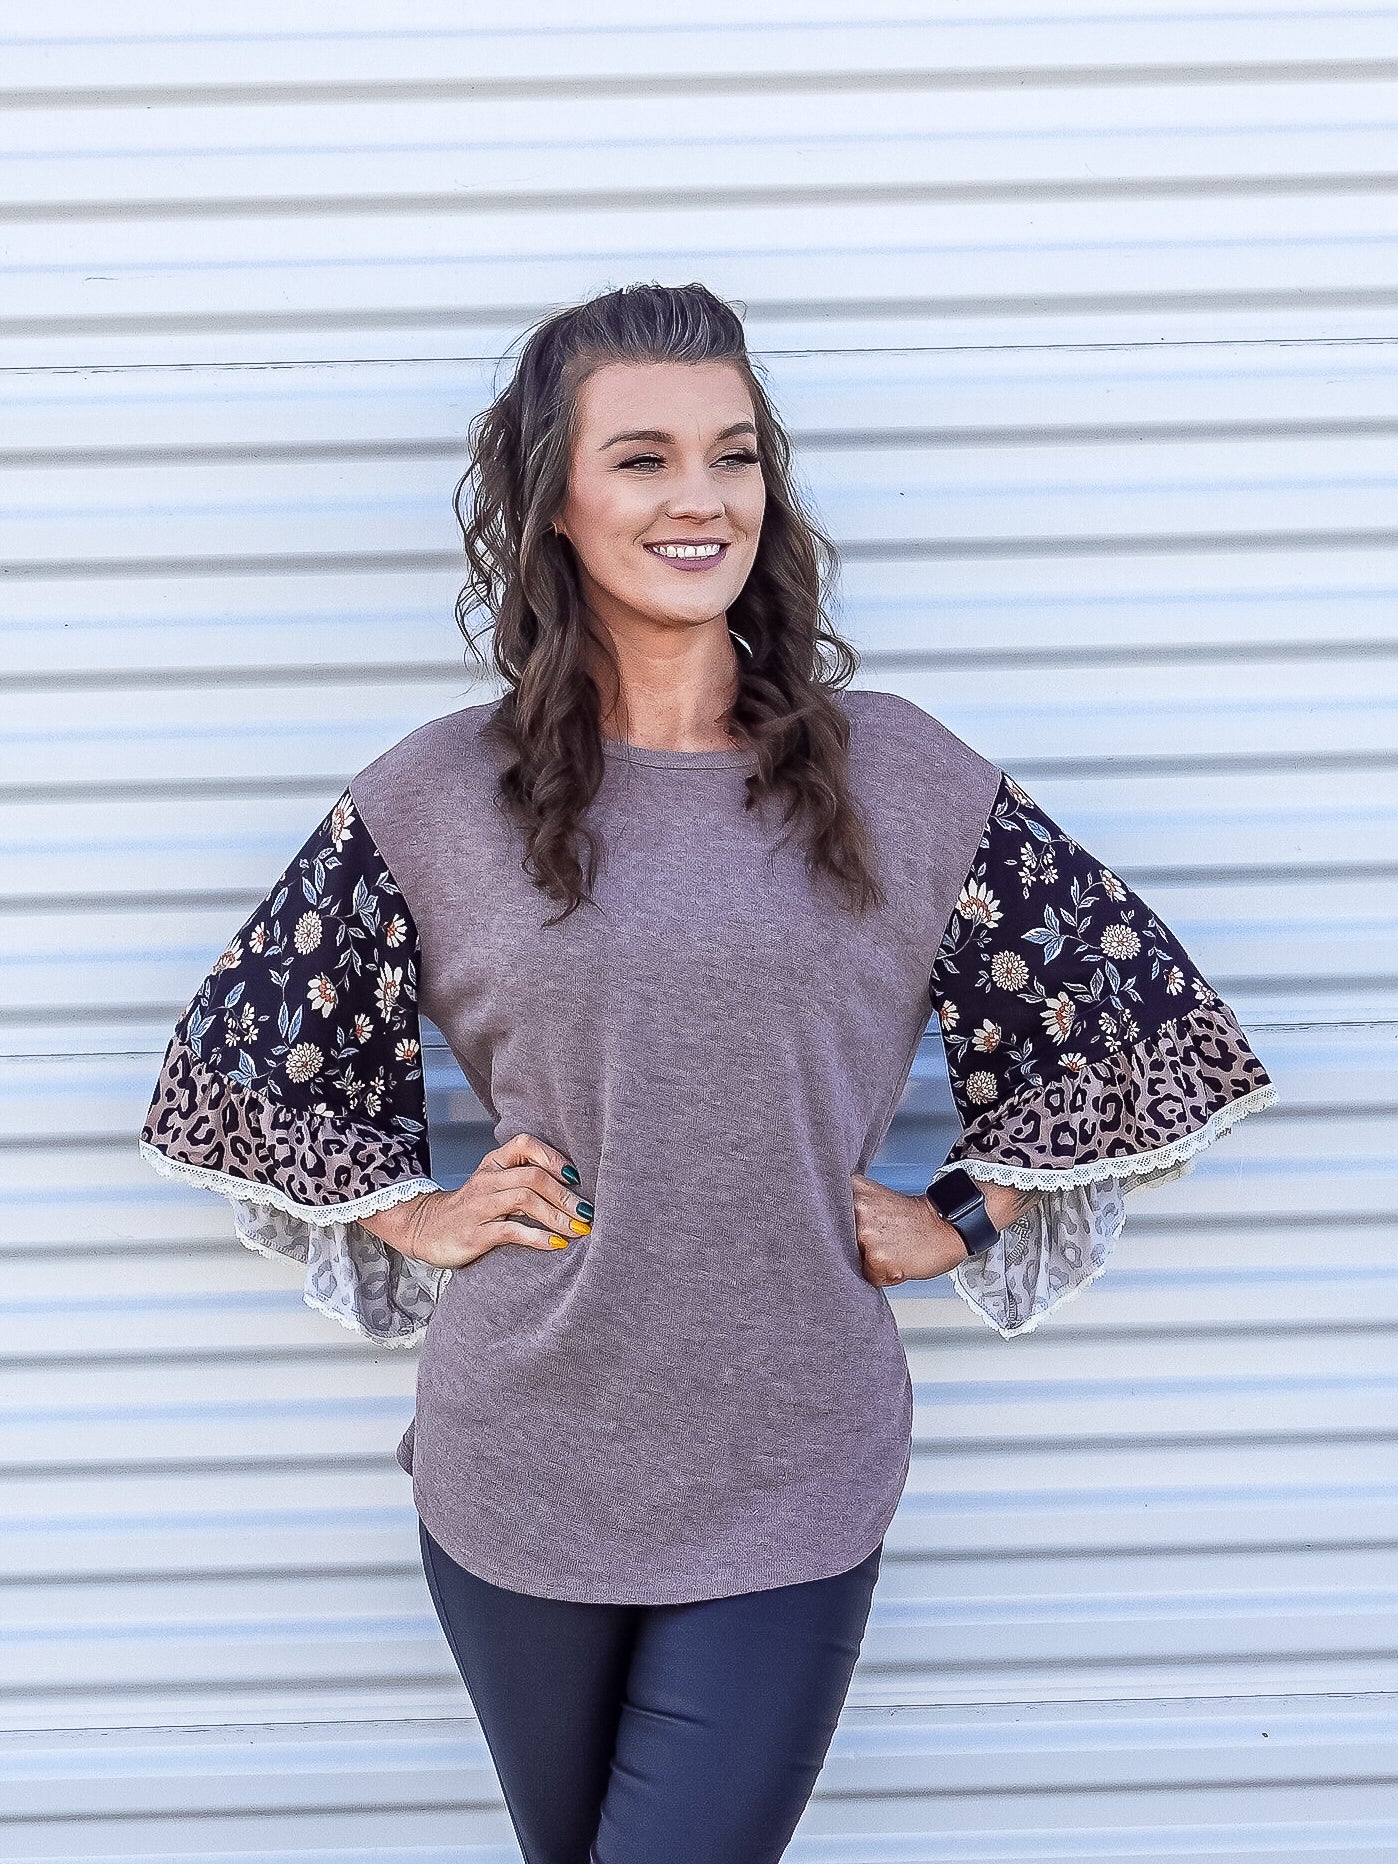 Floral short bell sleeve top sleeve top paired with metallic jeggings